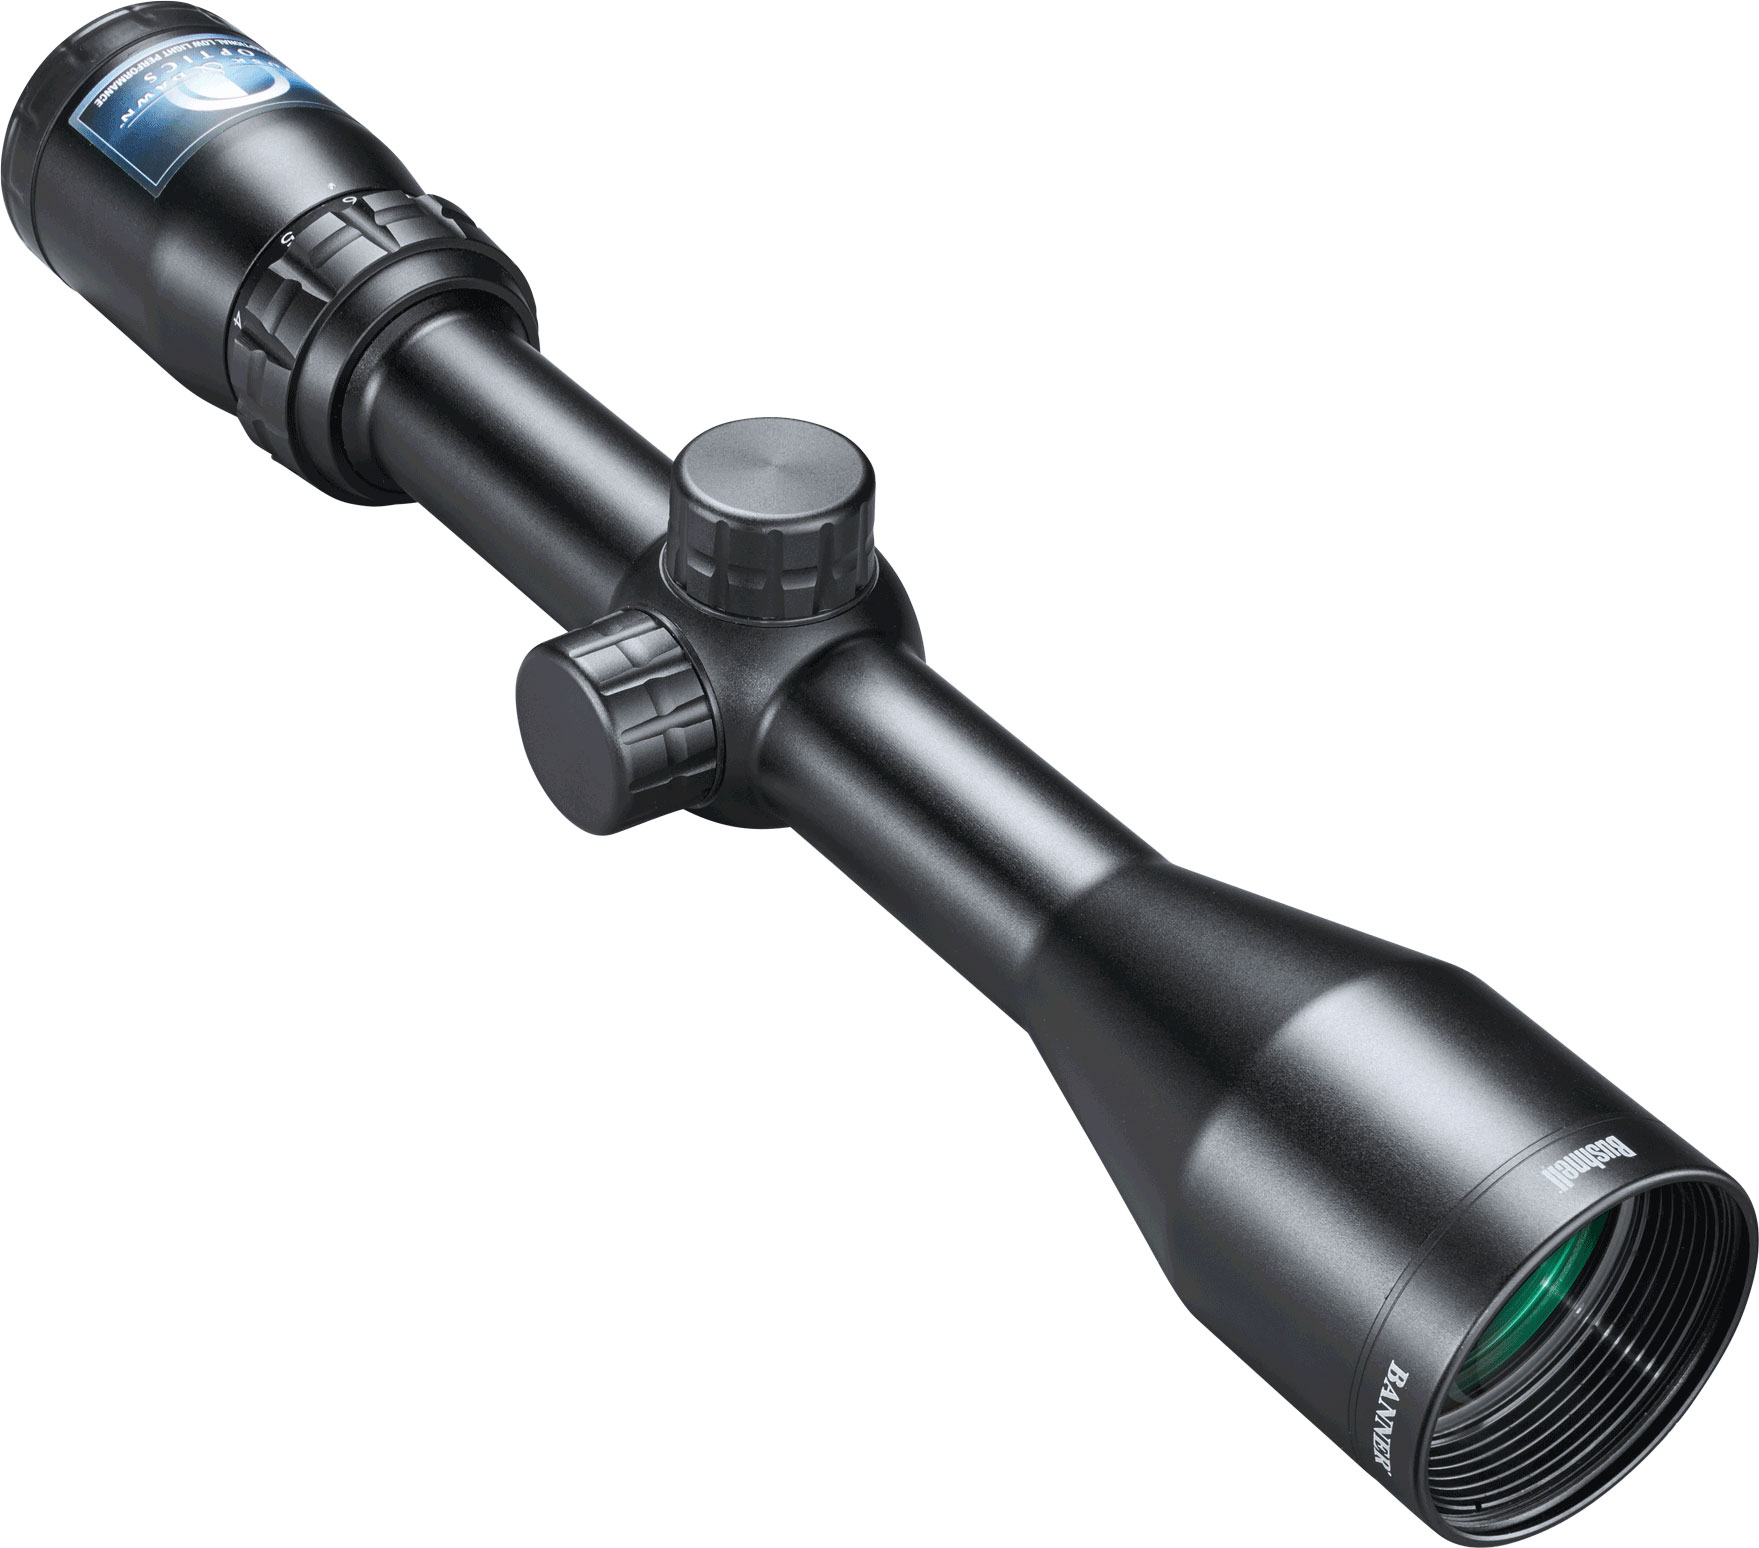 Bushnell Banner 3-9x40mm Riflescope, 1 inch Tube, Second Focal Plane | 39%  Off 4.4 Star Rating w/ Free Shipping